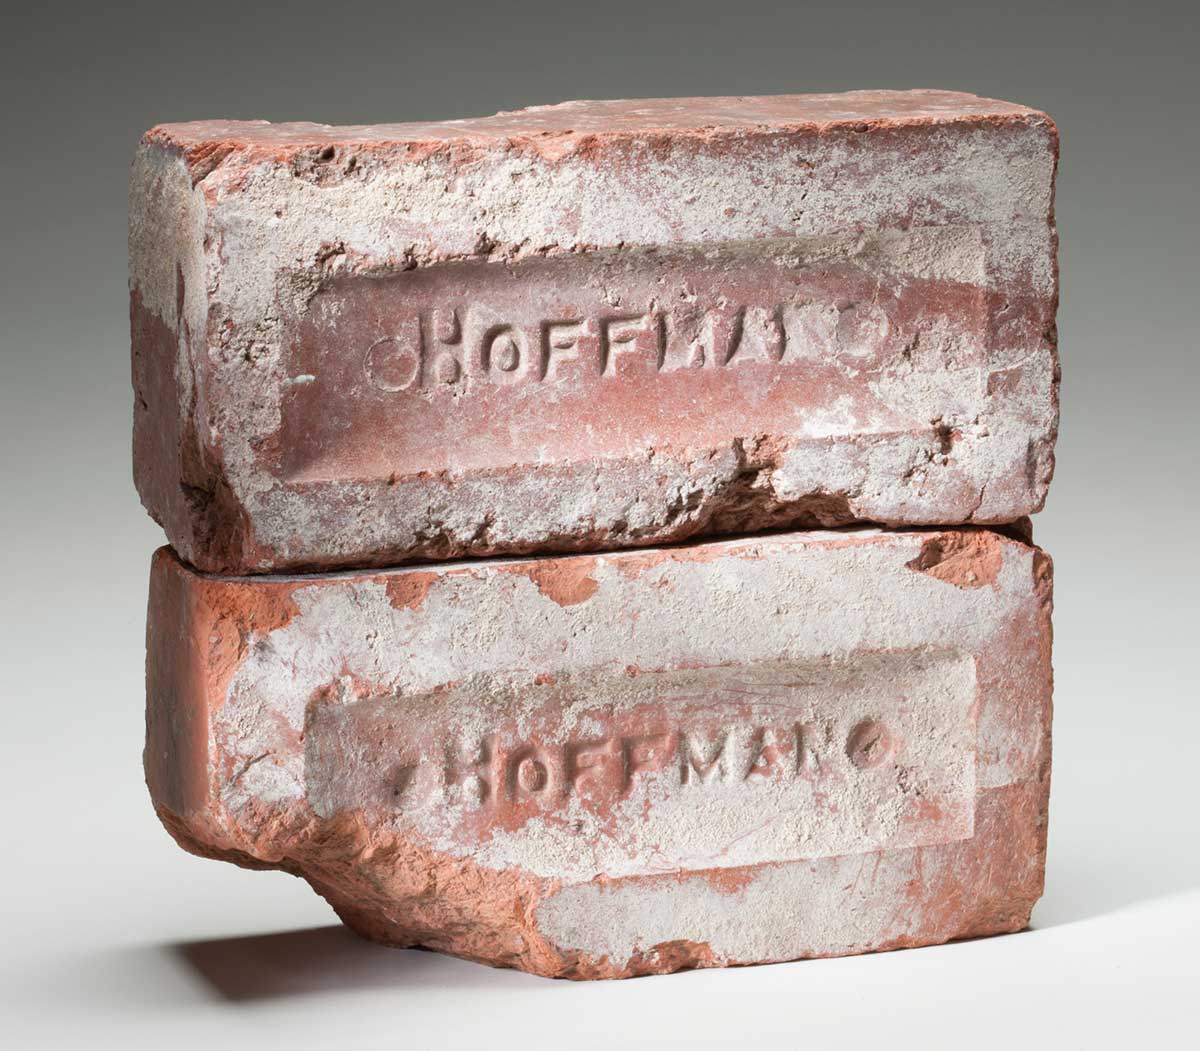 A rectangular red clay and concrete brick. White concrete is coated across four sides of the brick. The word 'HOFFMAN', is imprinted on the top of the brick.